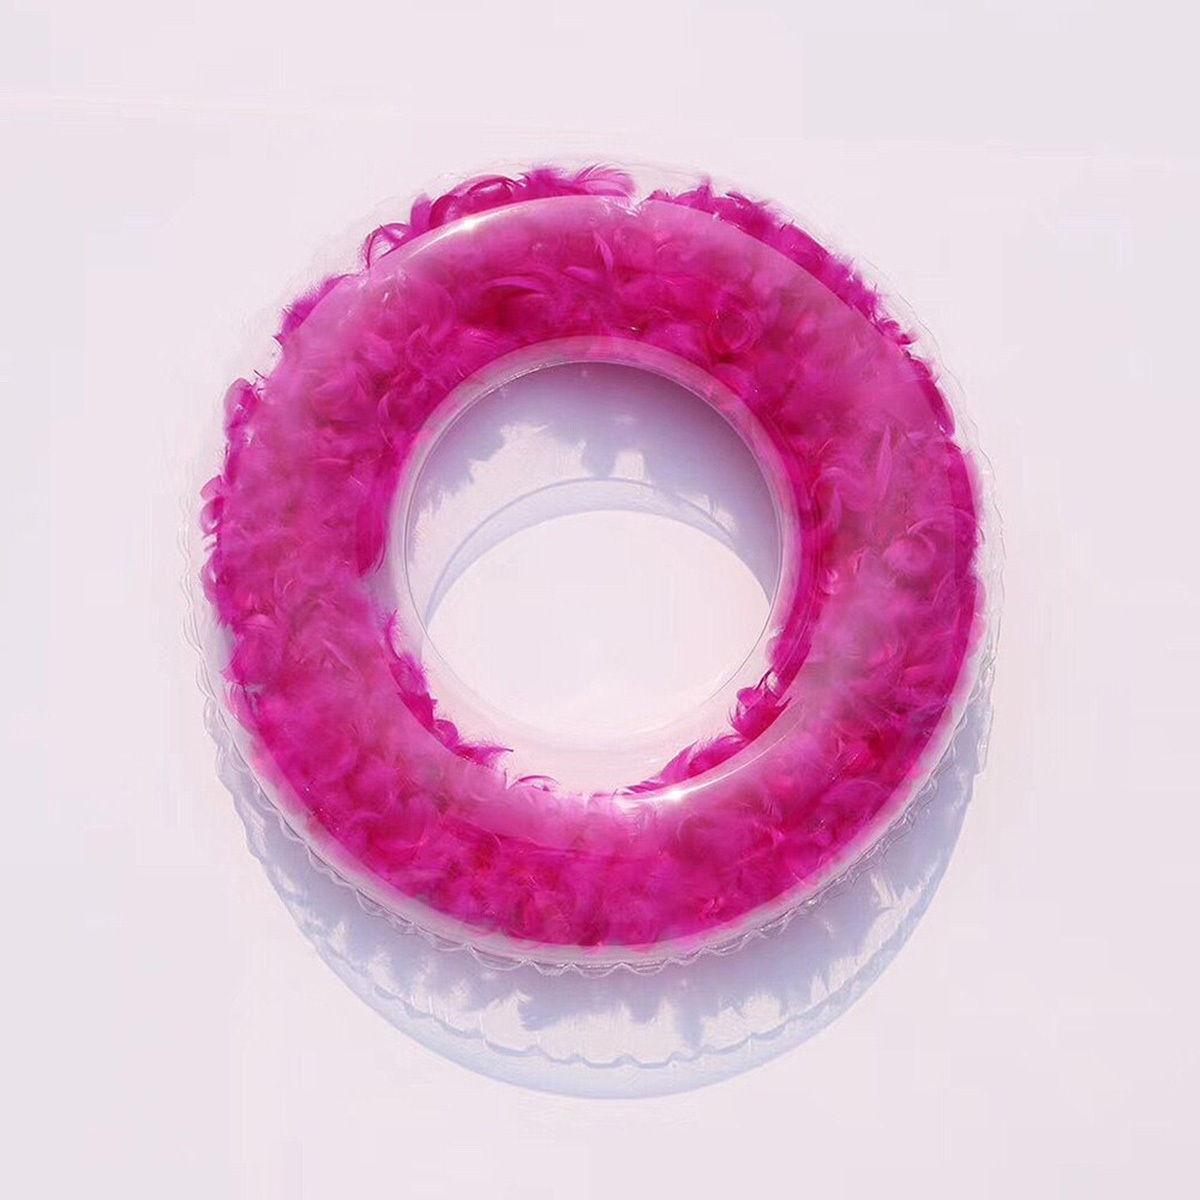 Feather-Inflatable-Swimming-Ring-Floating-Circle-Adult--Kid-Beach-Pool-Toys-Swimming-Ring-1568924-5